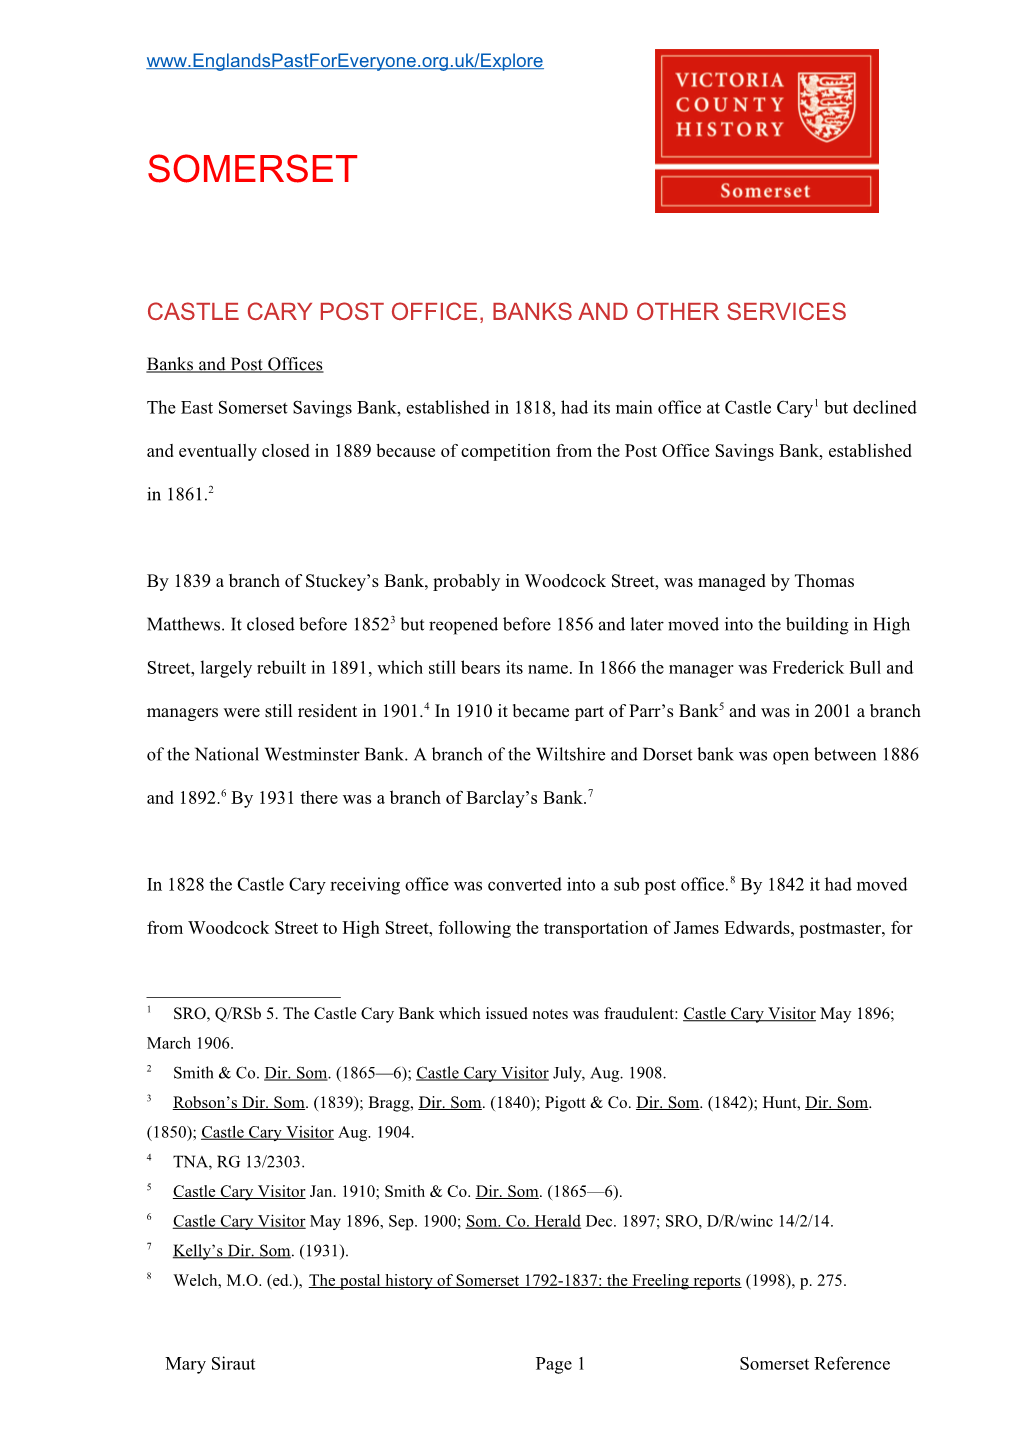 Castle Cary Post Office, Banks and Other Services